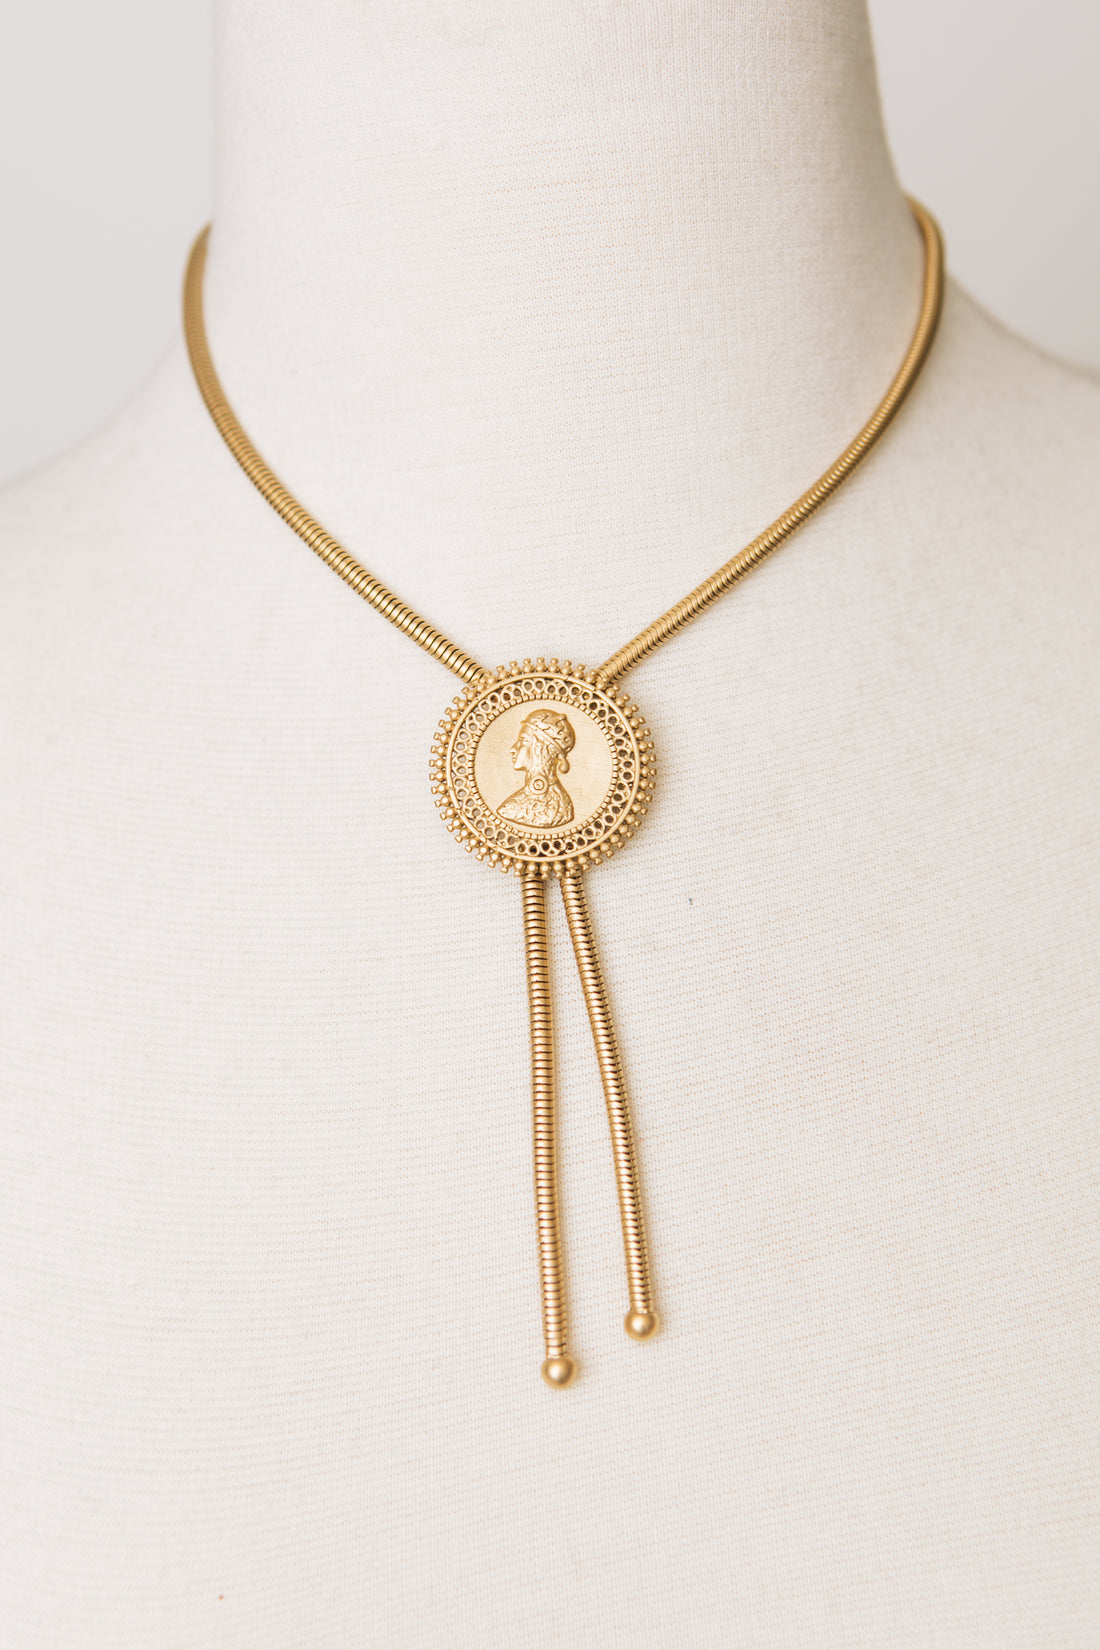 Oak & Ivy - Waterproof Bolo Necklace With Coin Pendant